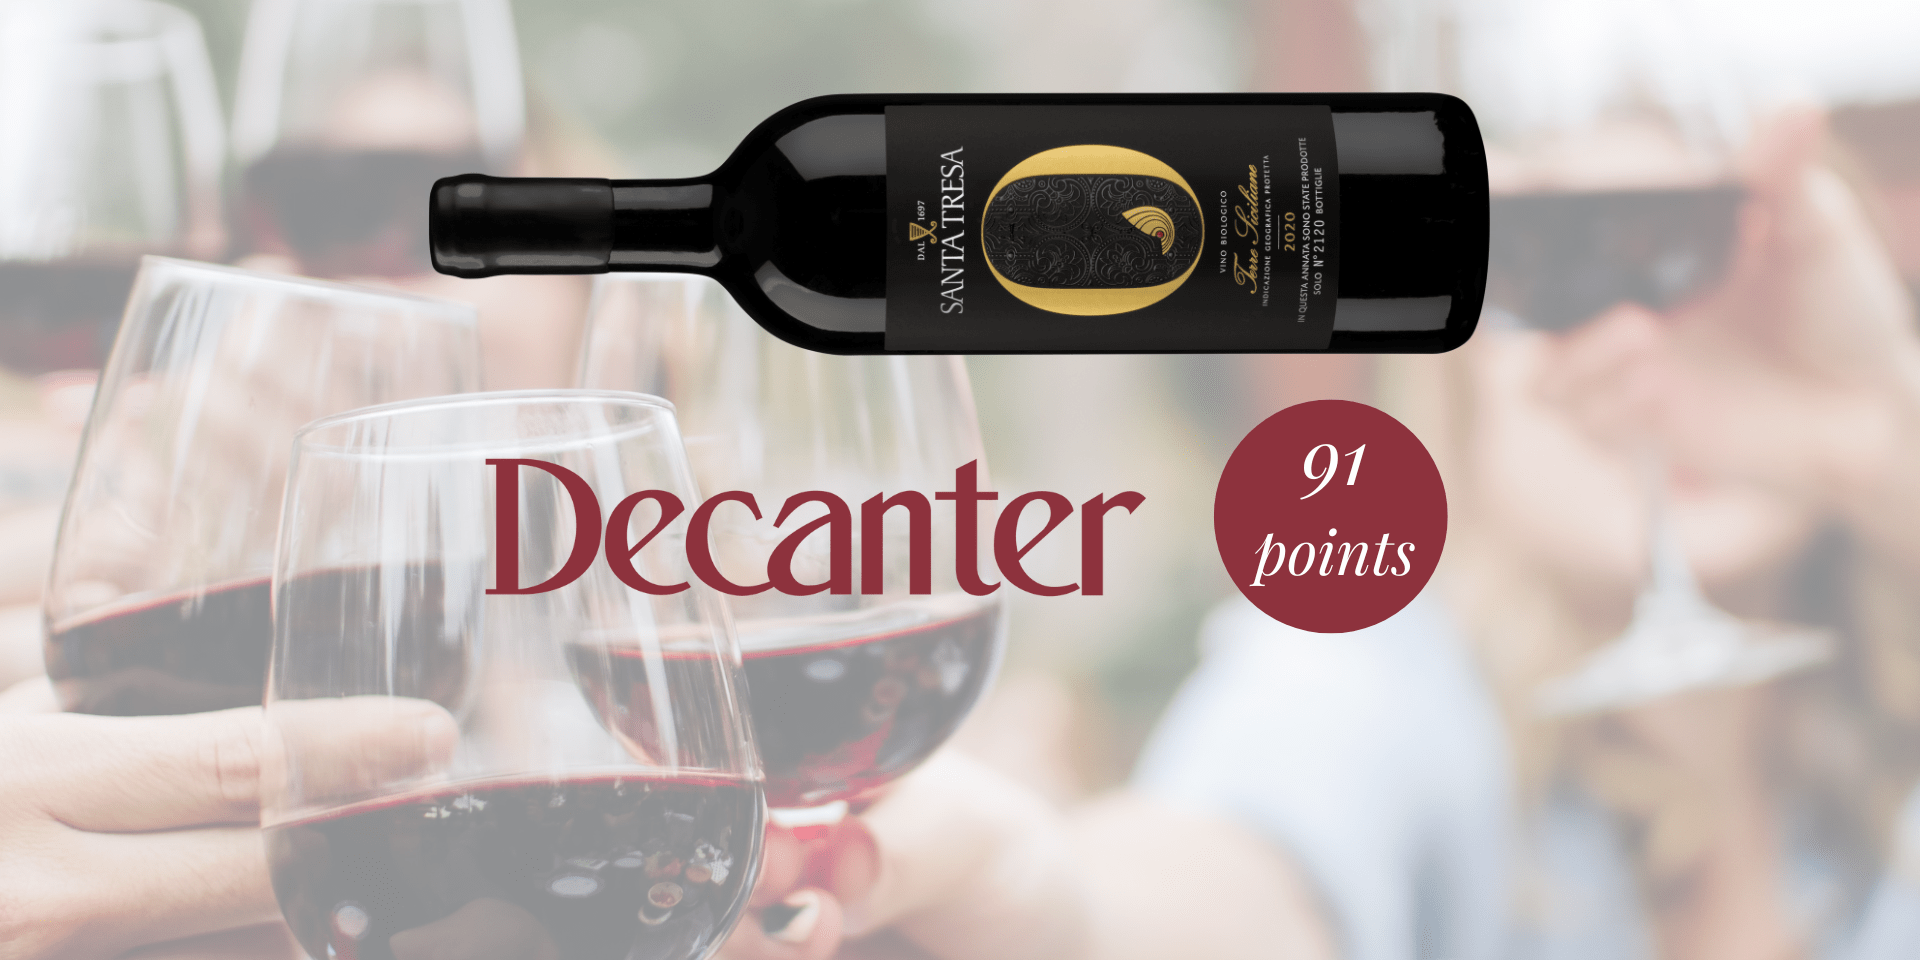 Decanter awarded our Orisi!